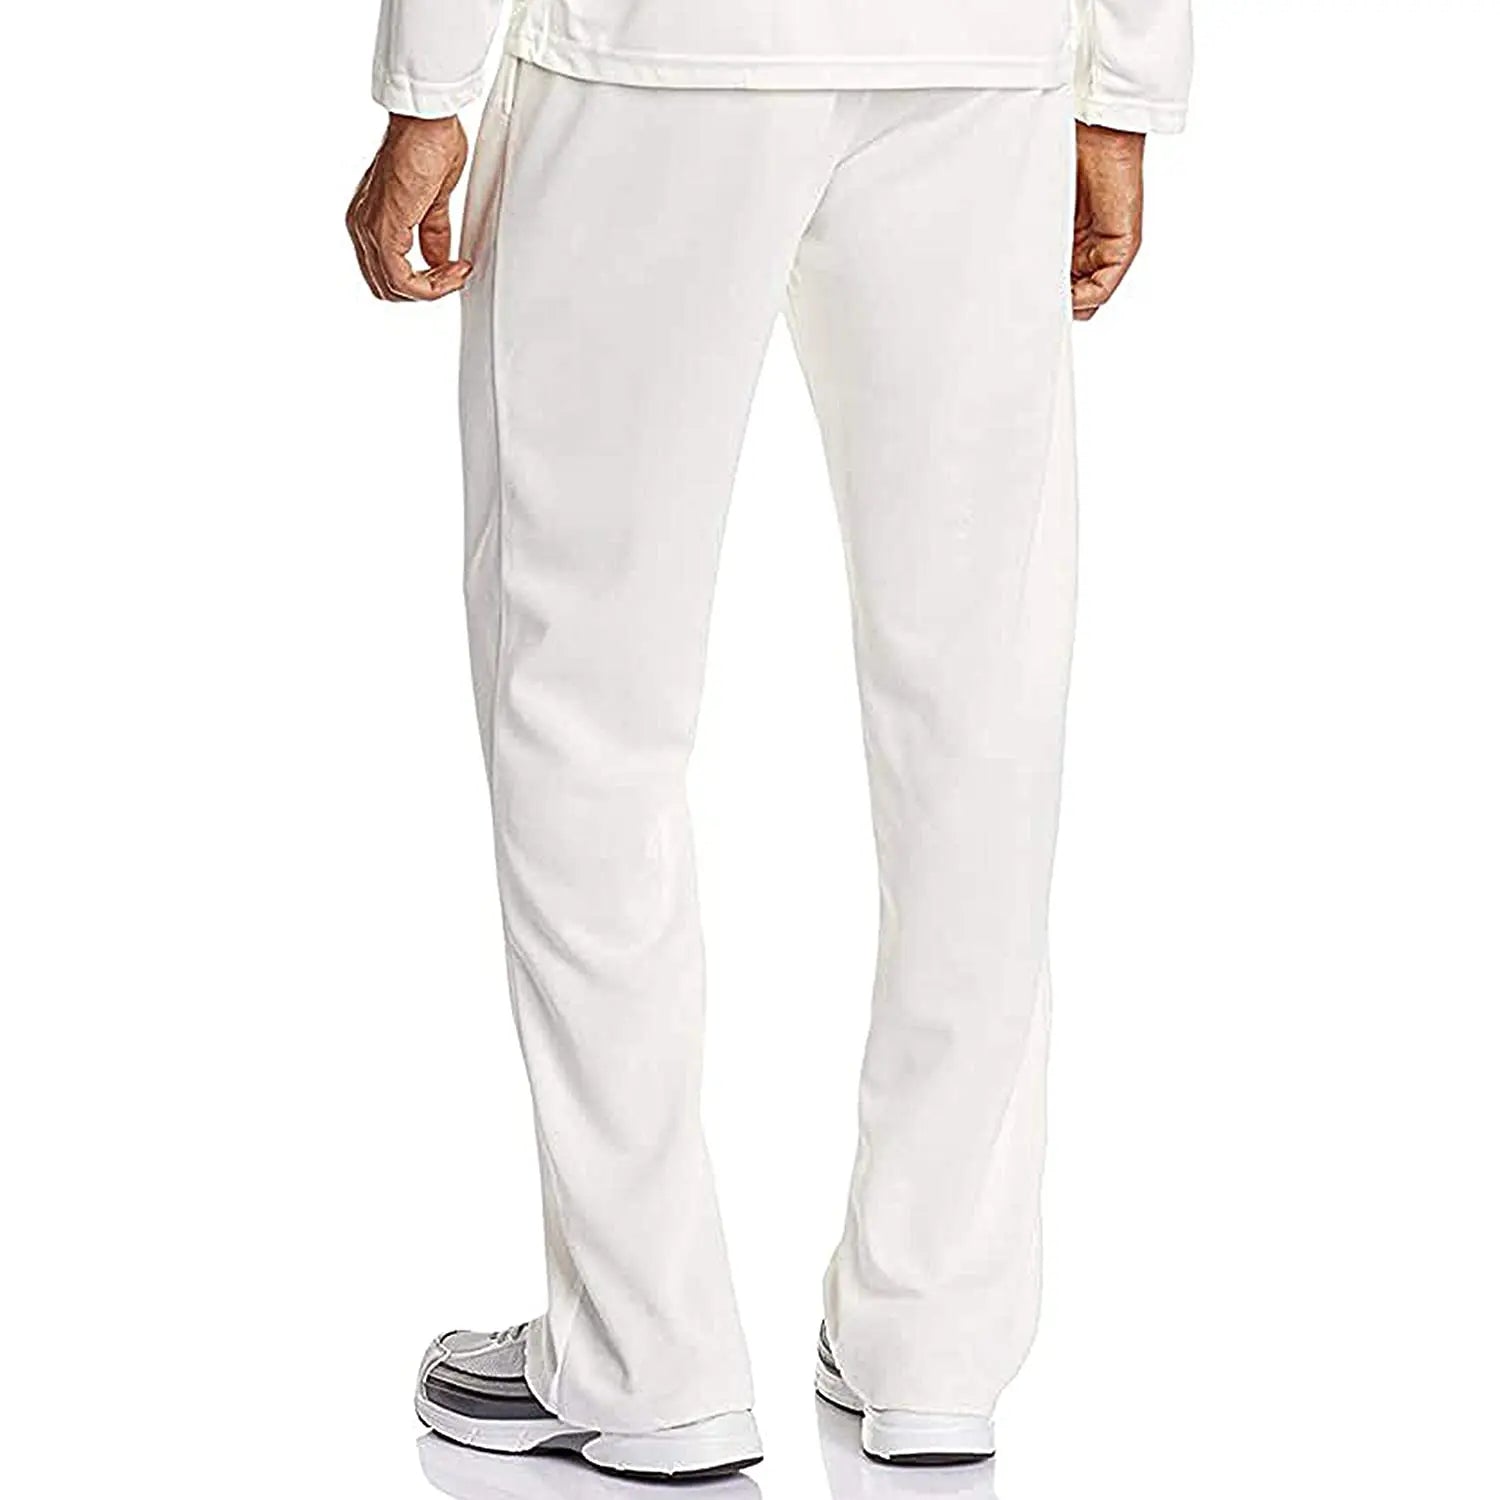 Track Pant Men SG MTPSSR067 Quite Grey M : Amazon.in: Clothing & Accessories